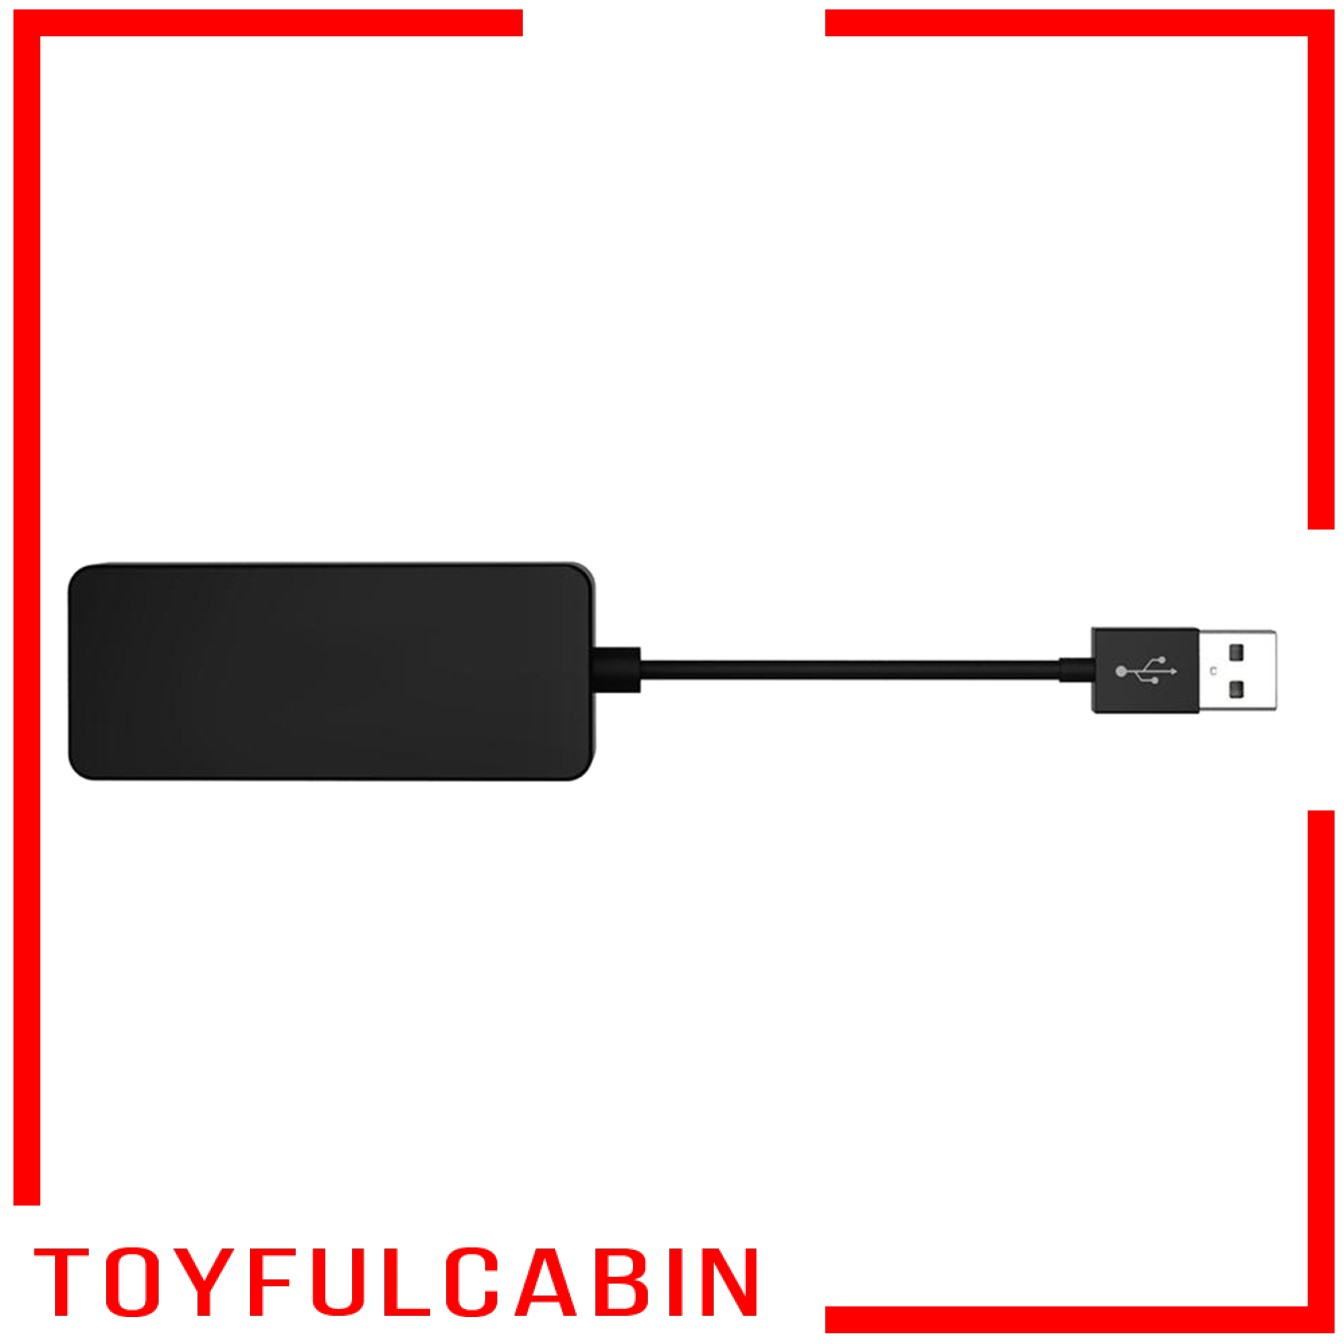 Usb Dongle Kết Nối Bluetooth Cho Iphone Android